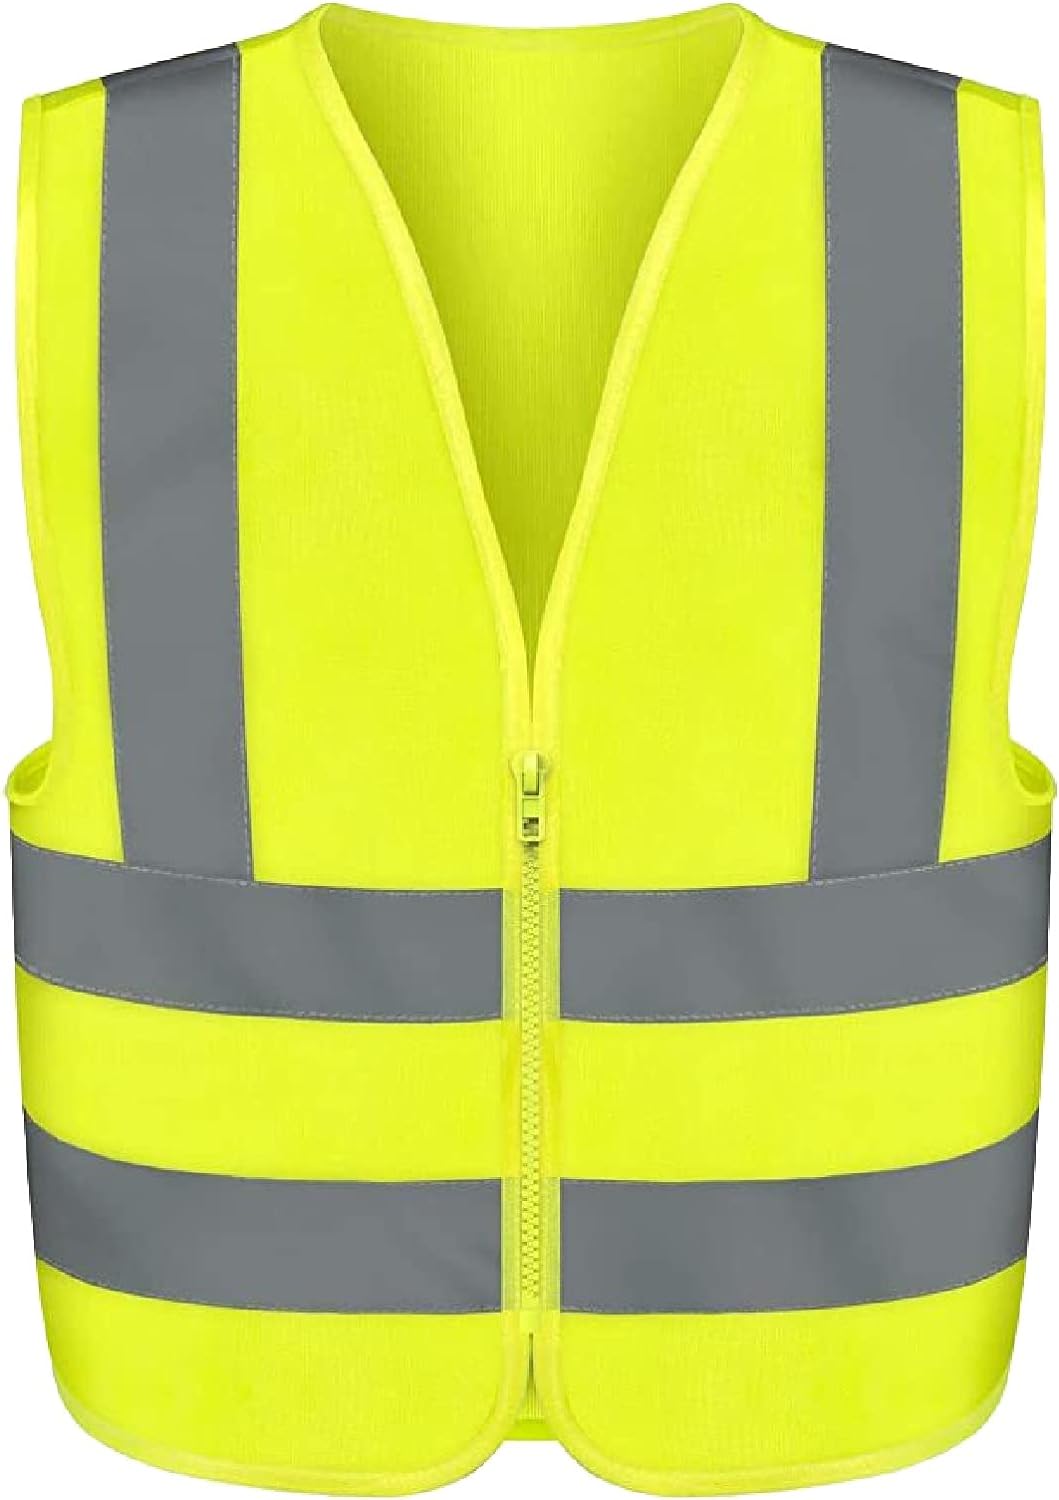 Generic NEIKO High Visibility Safety Vest with Reflective Strips | Neon Yellow Color | Zipper Front | High Visibility and Safety